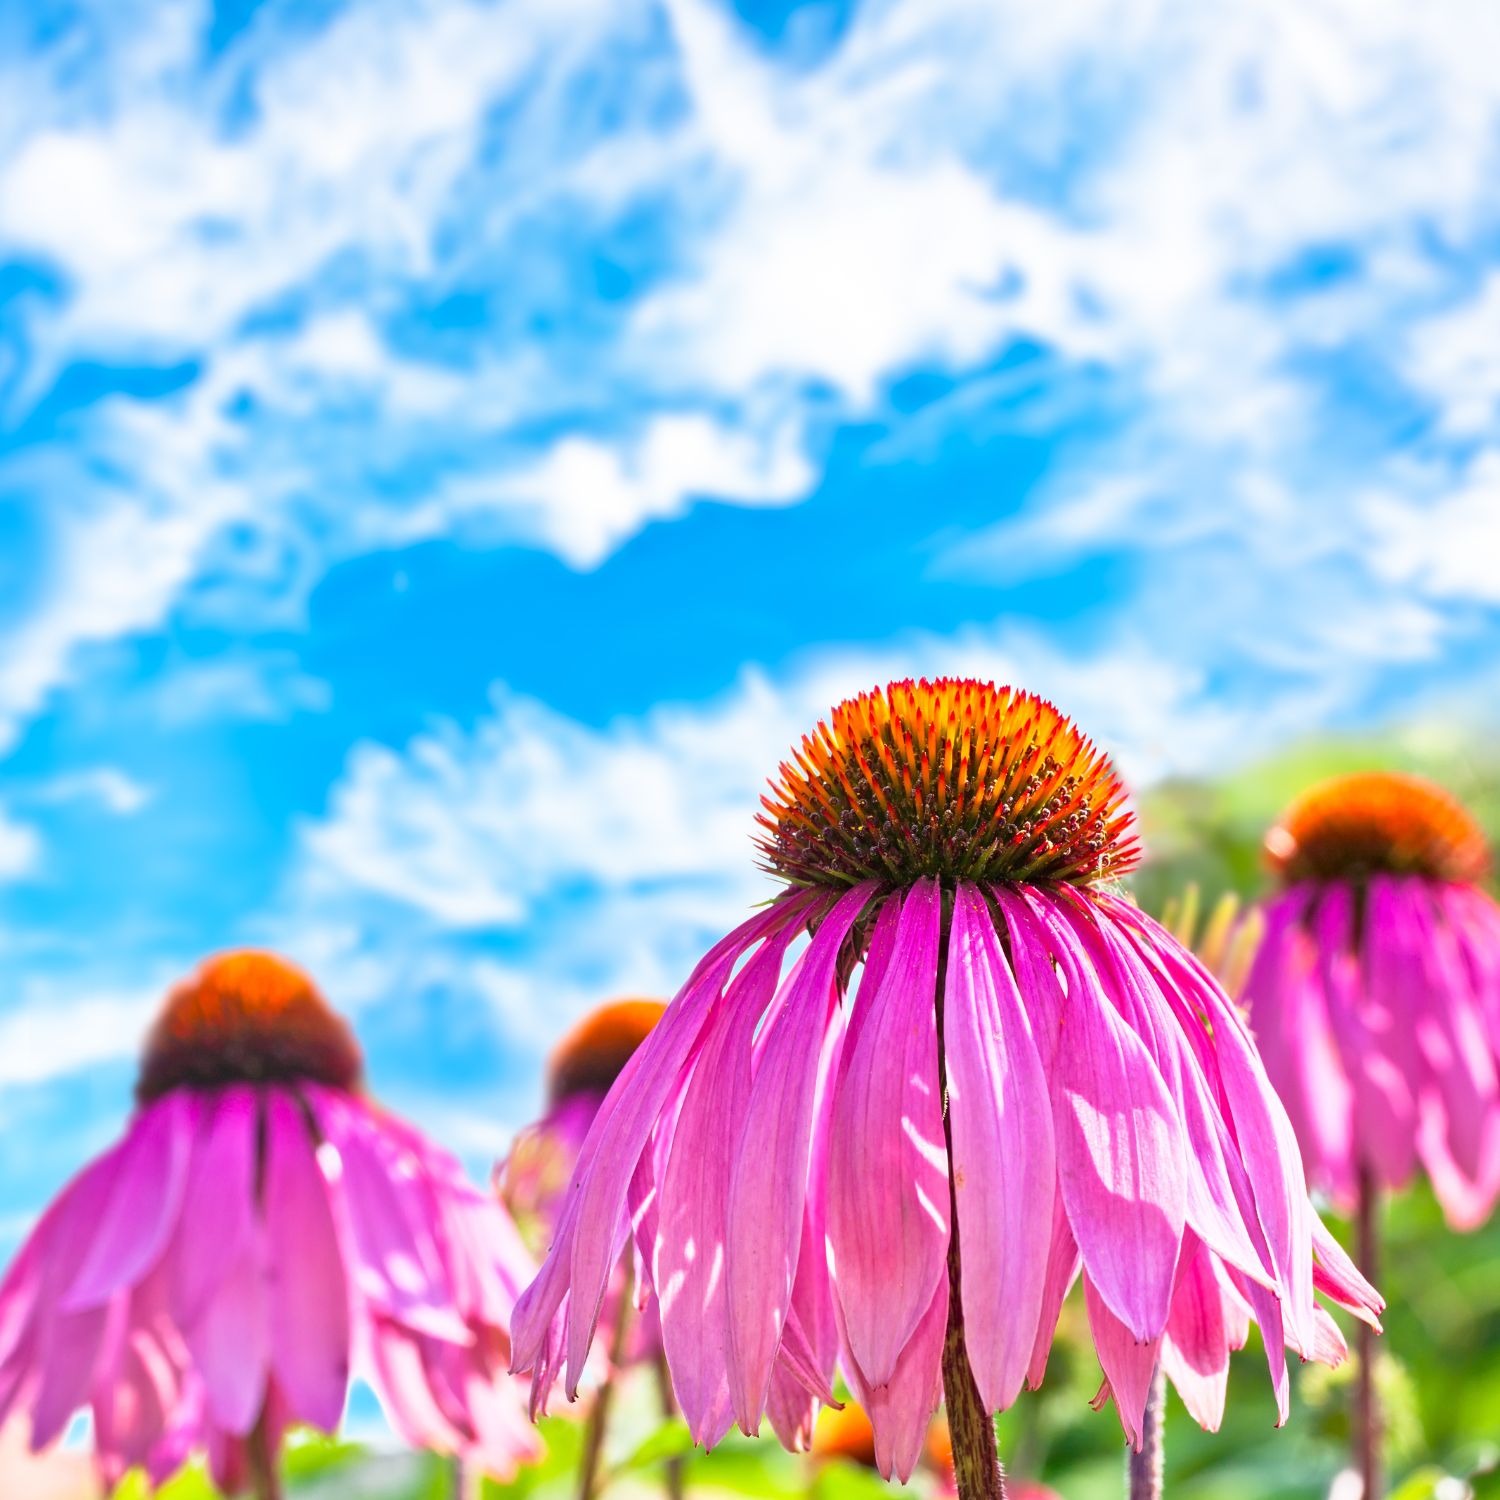 Purple or pink Coneflowers in a field with a blue sky with some white clouds